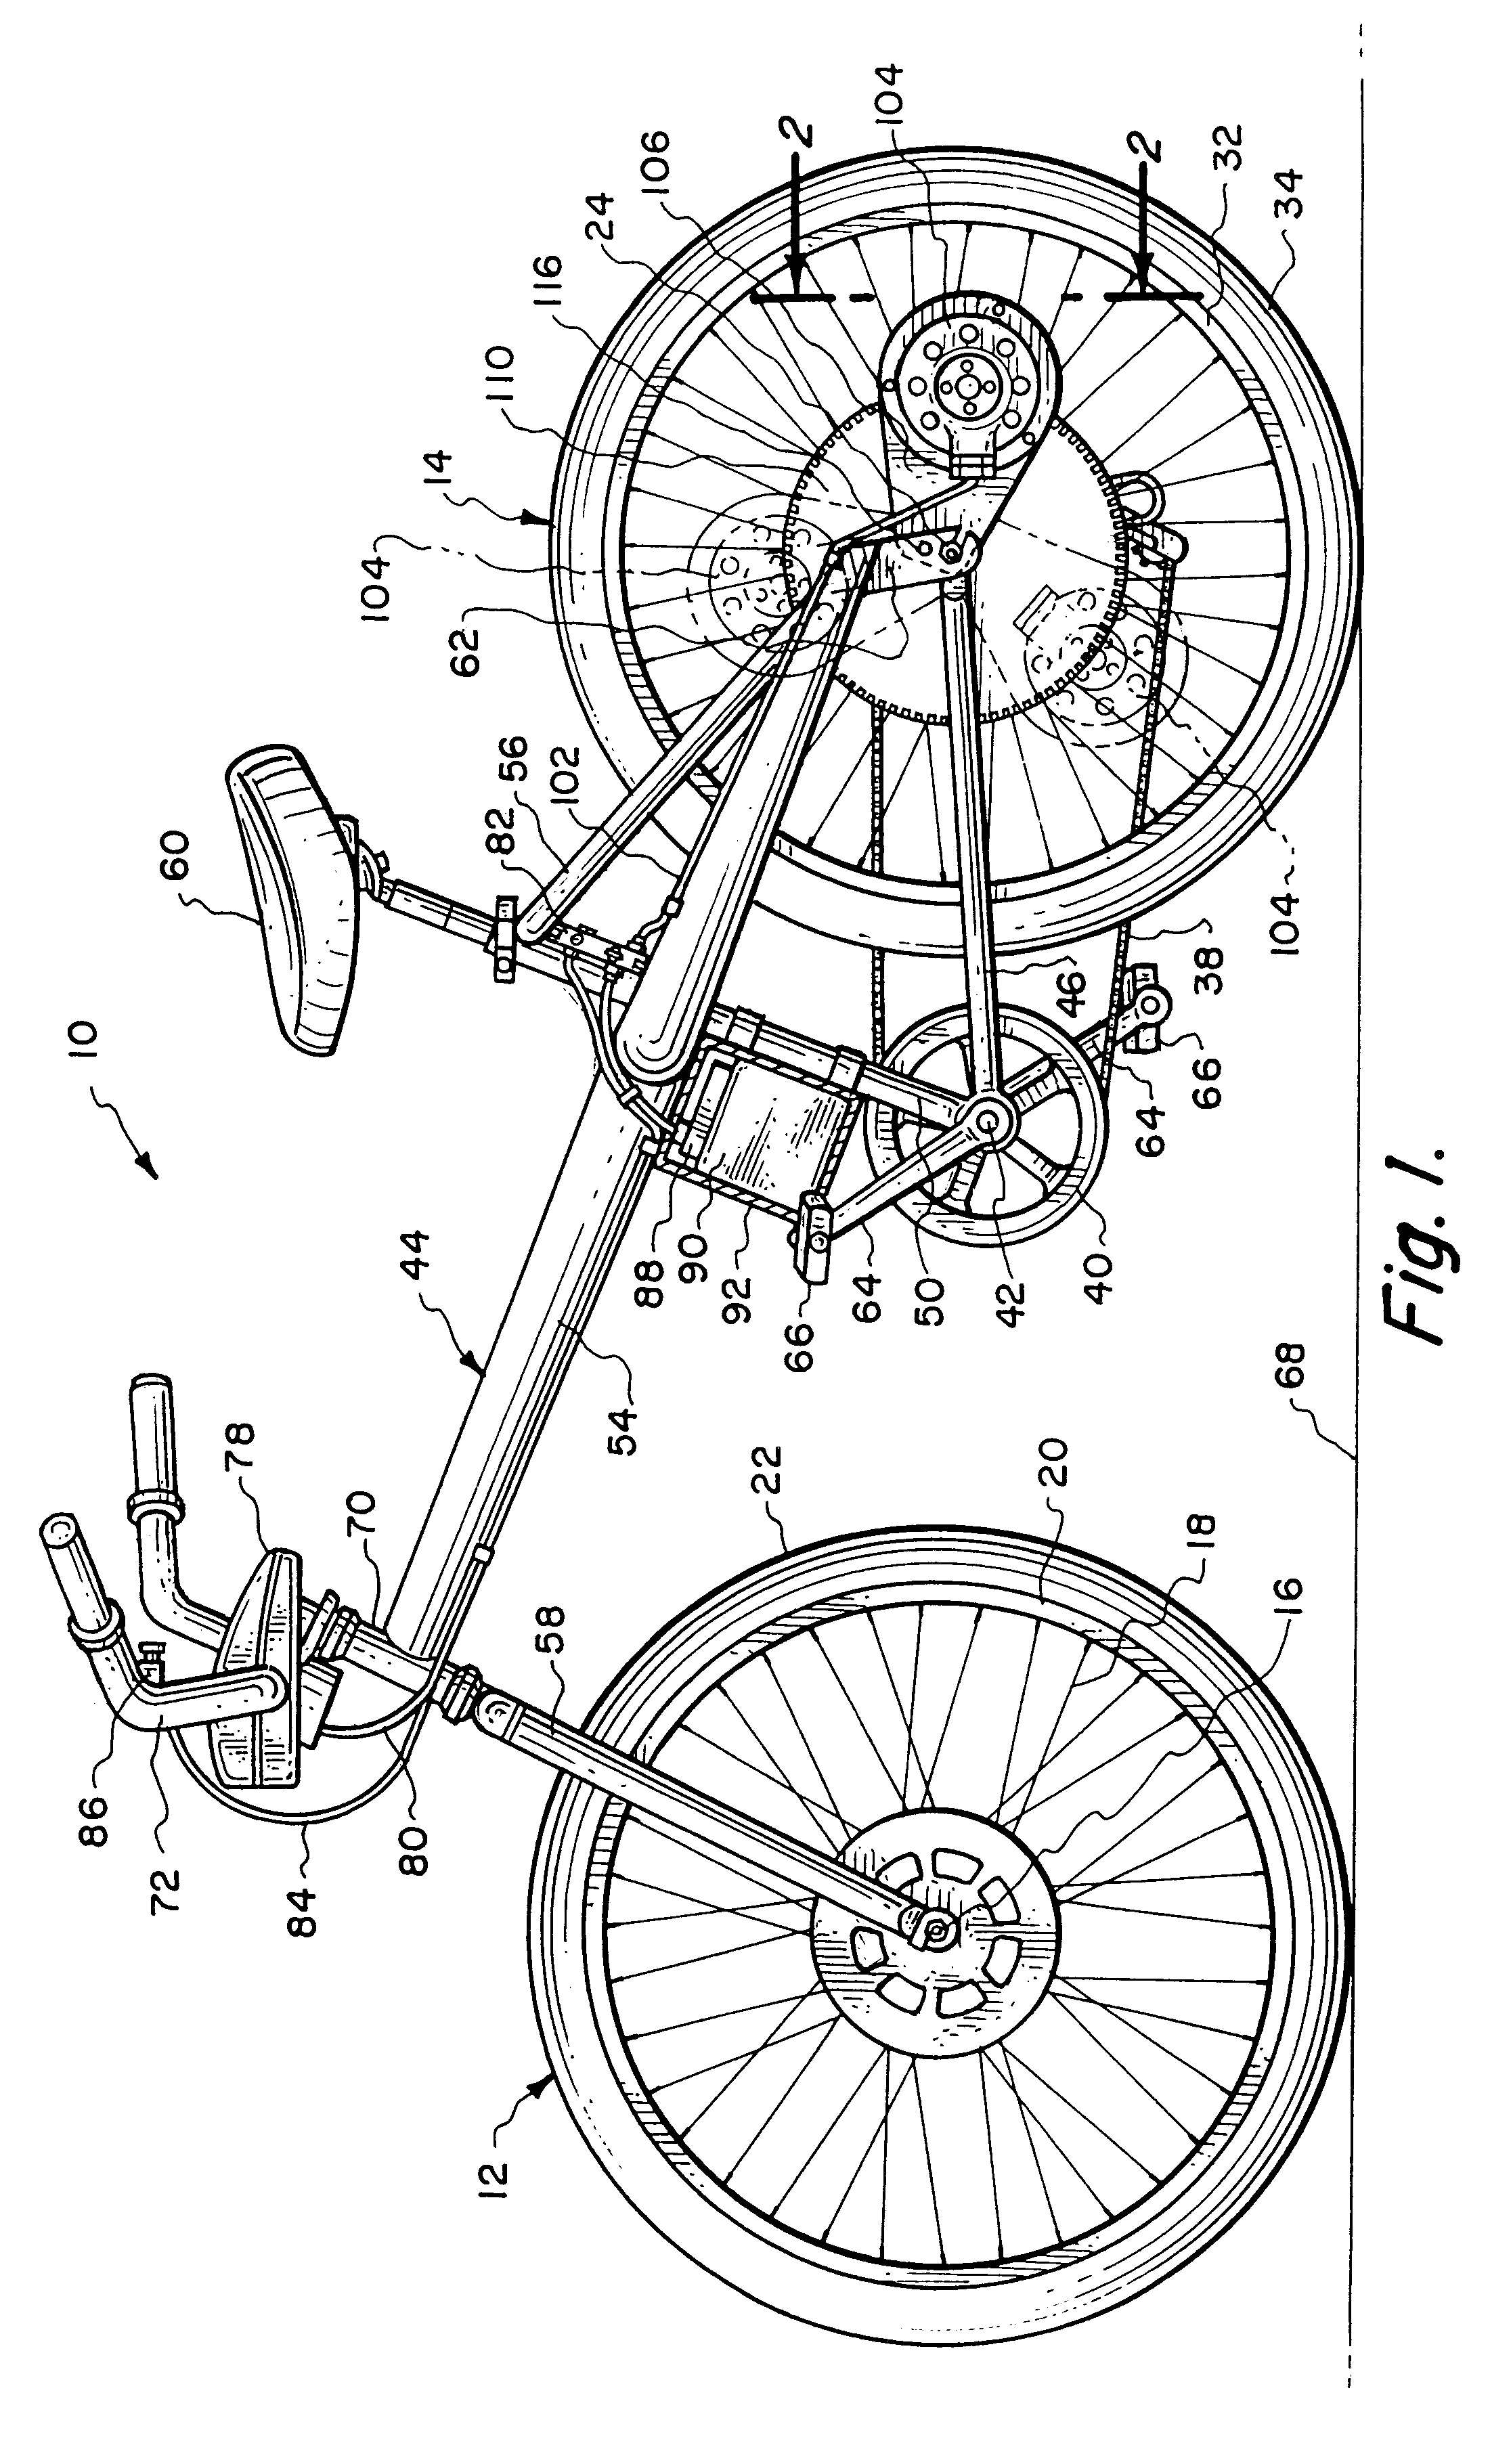 Precision direct drive mechanism for a power assist apparatus for a bicycle